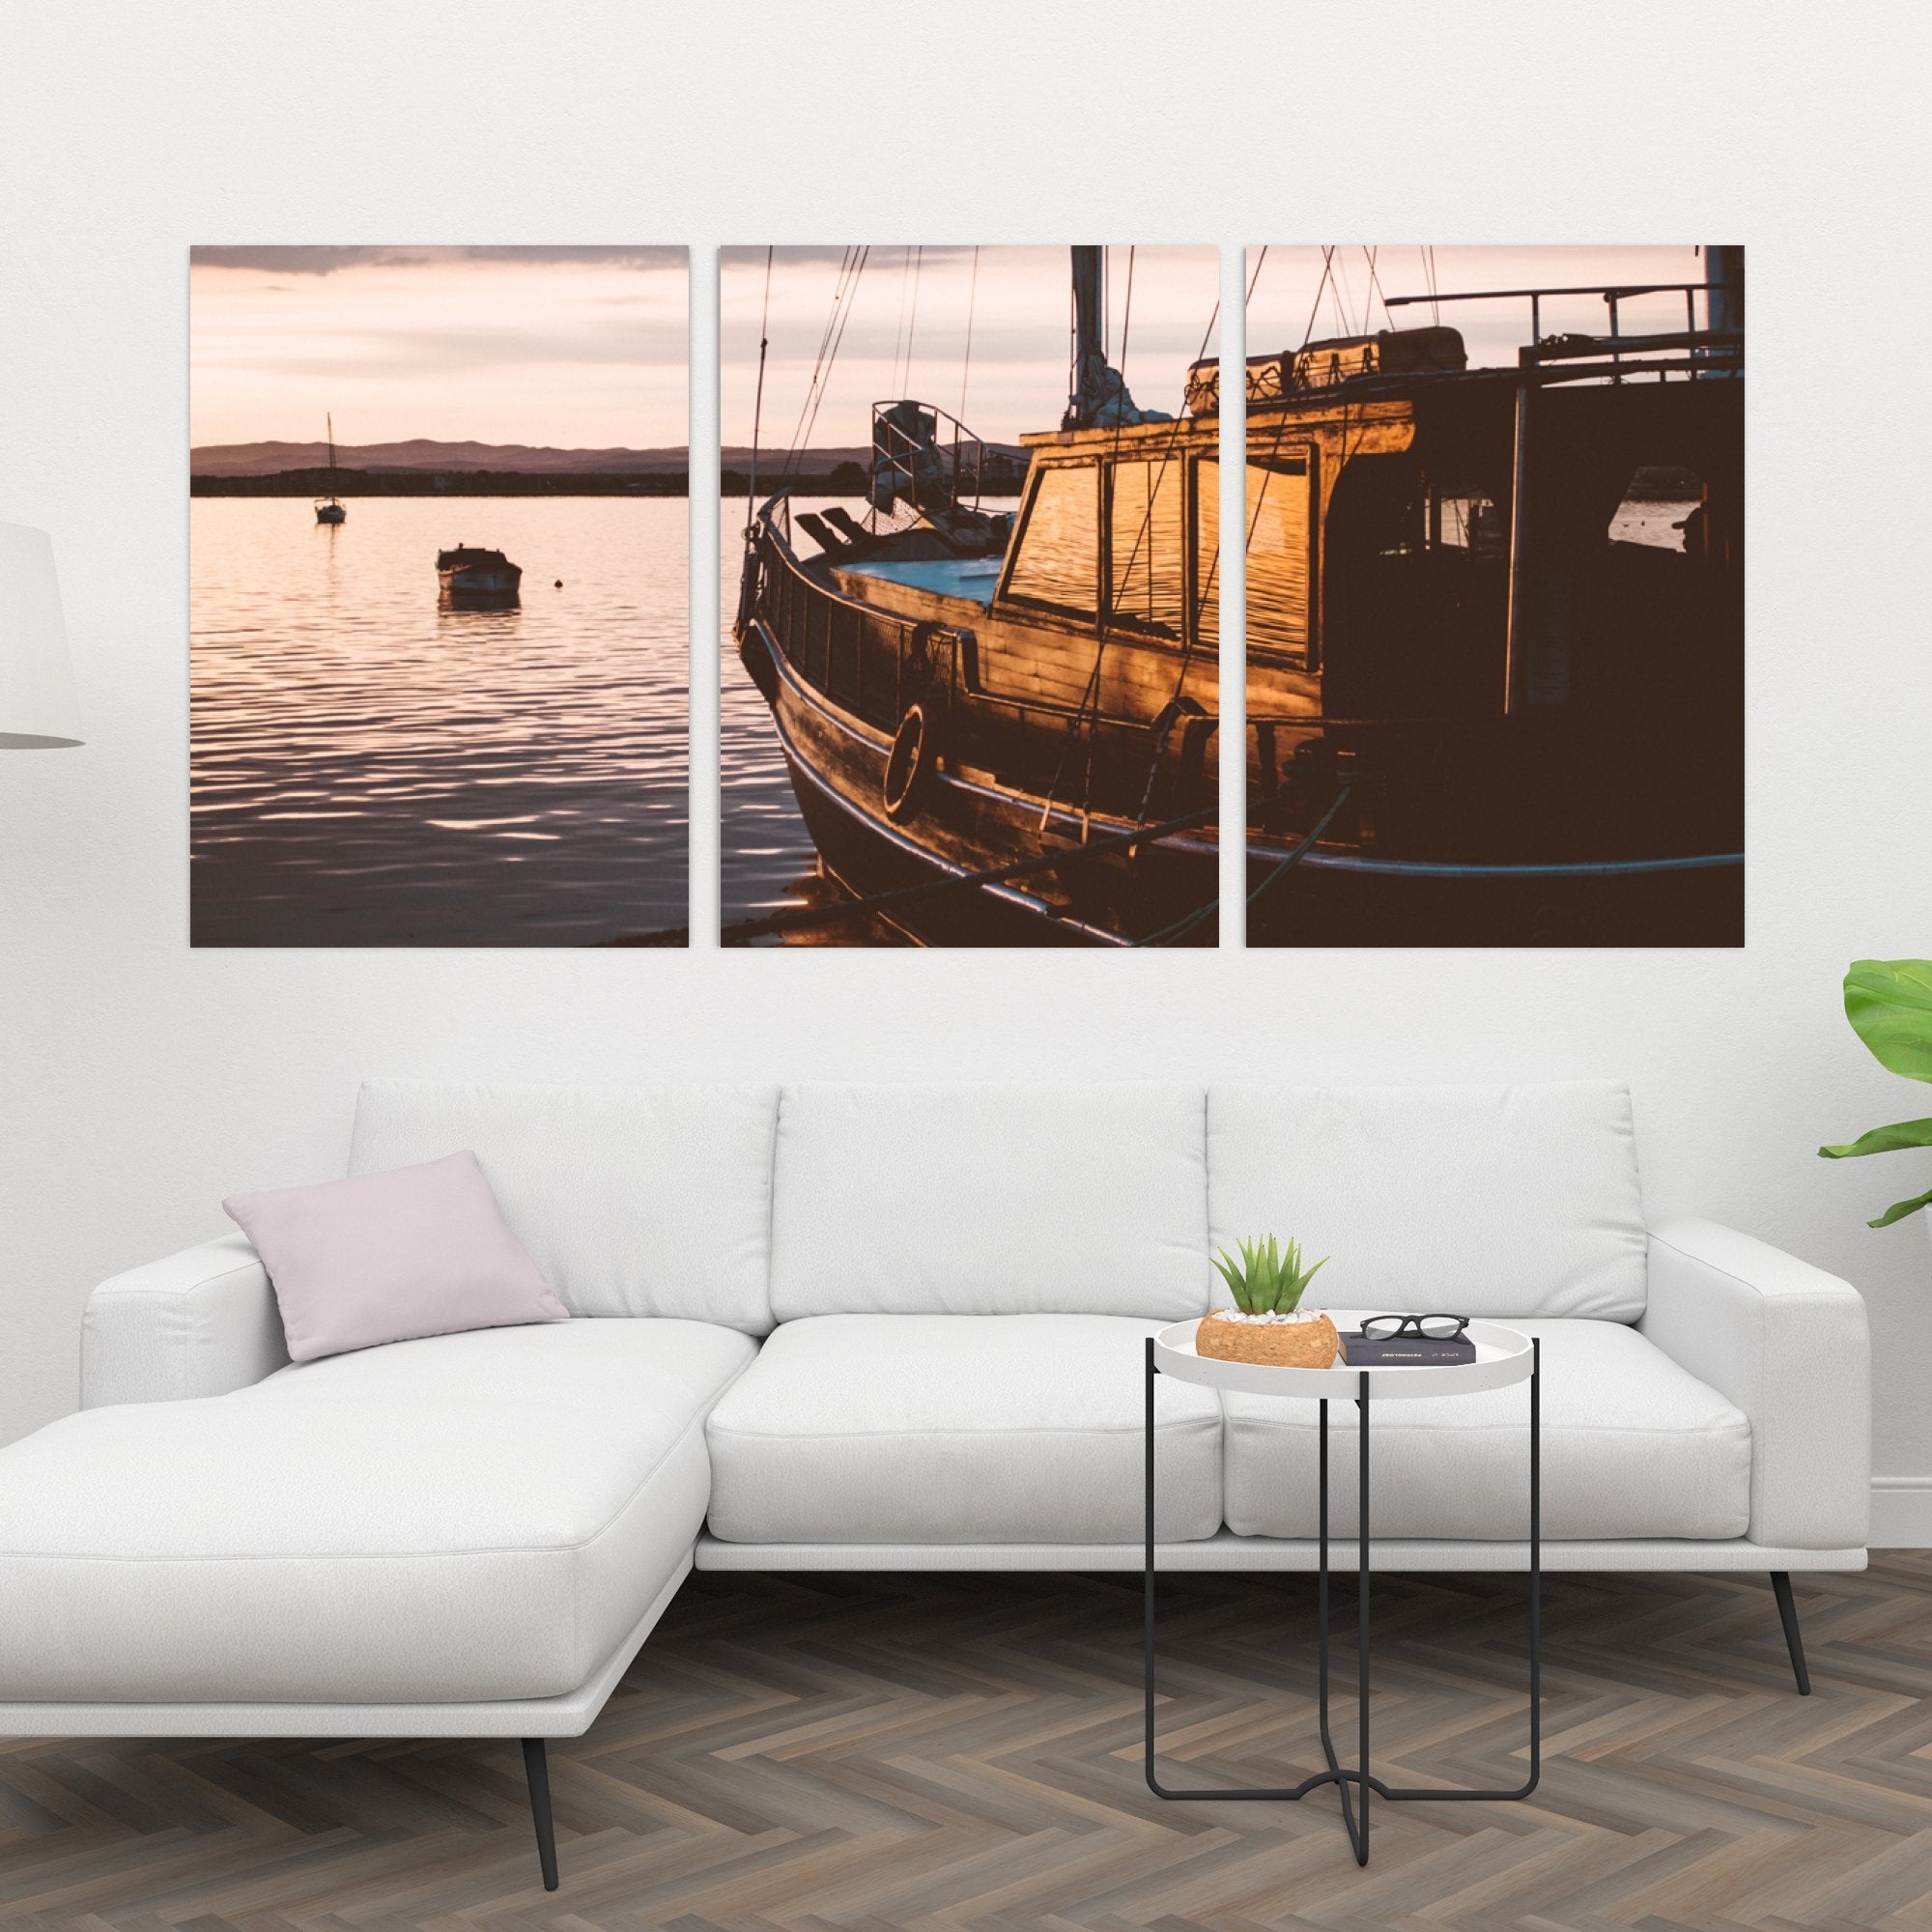 Details About Sunset On Fishing Boat 5 Piece Canvas Art Wall Art Picture Painting Home Decor